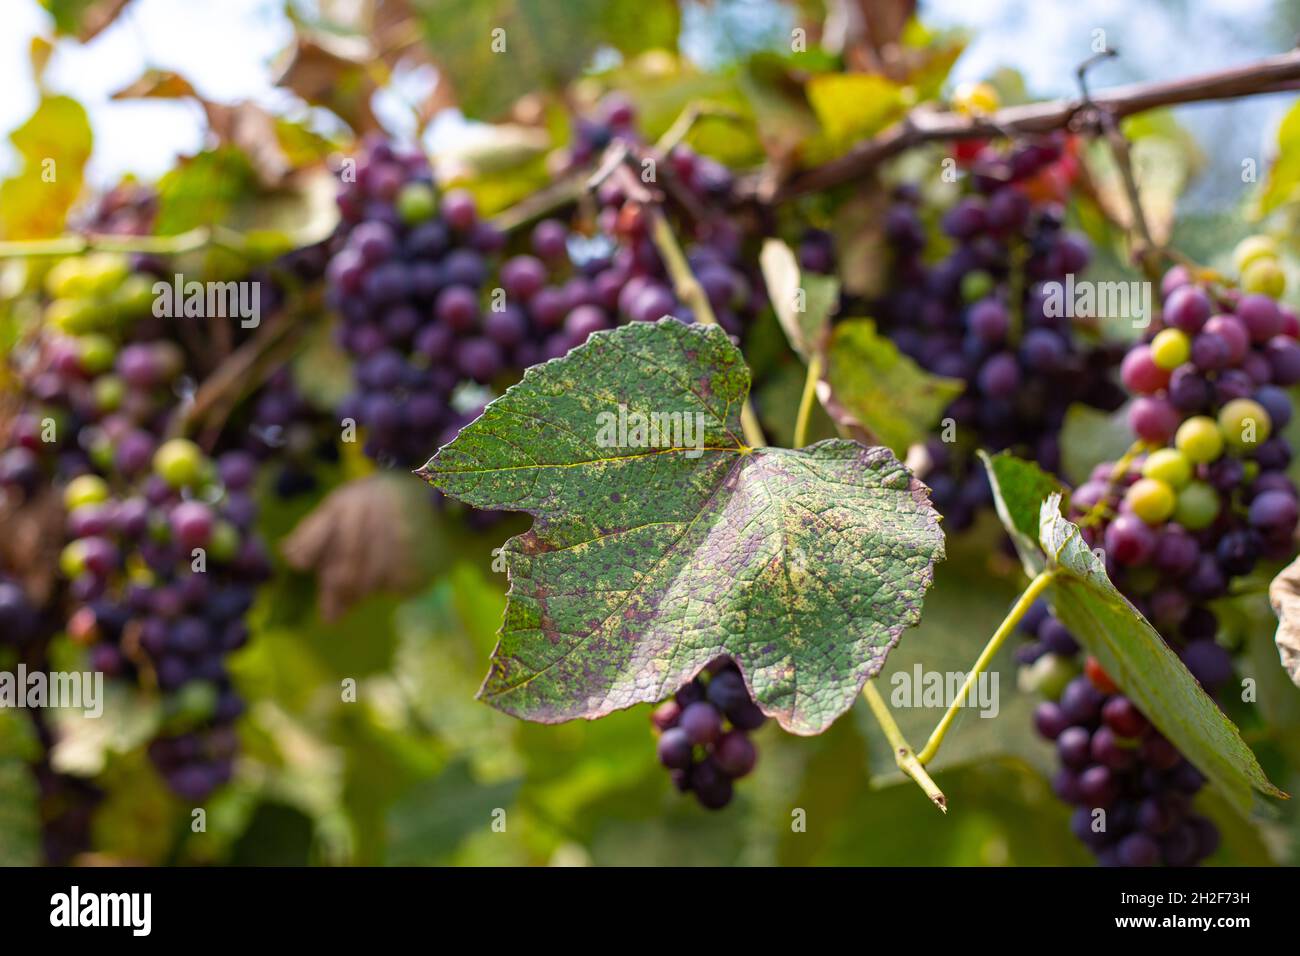 branches and dried leaves and fruits of the vineyard affected by garden pests Stock Photo